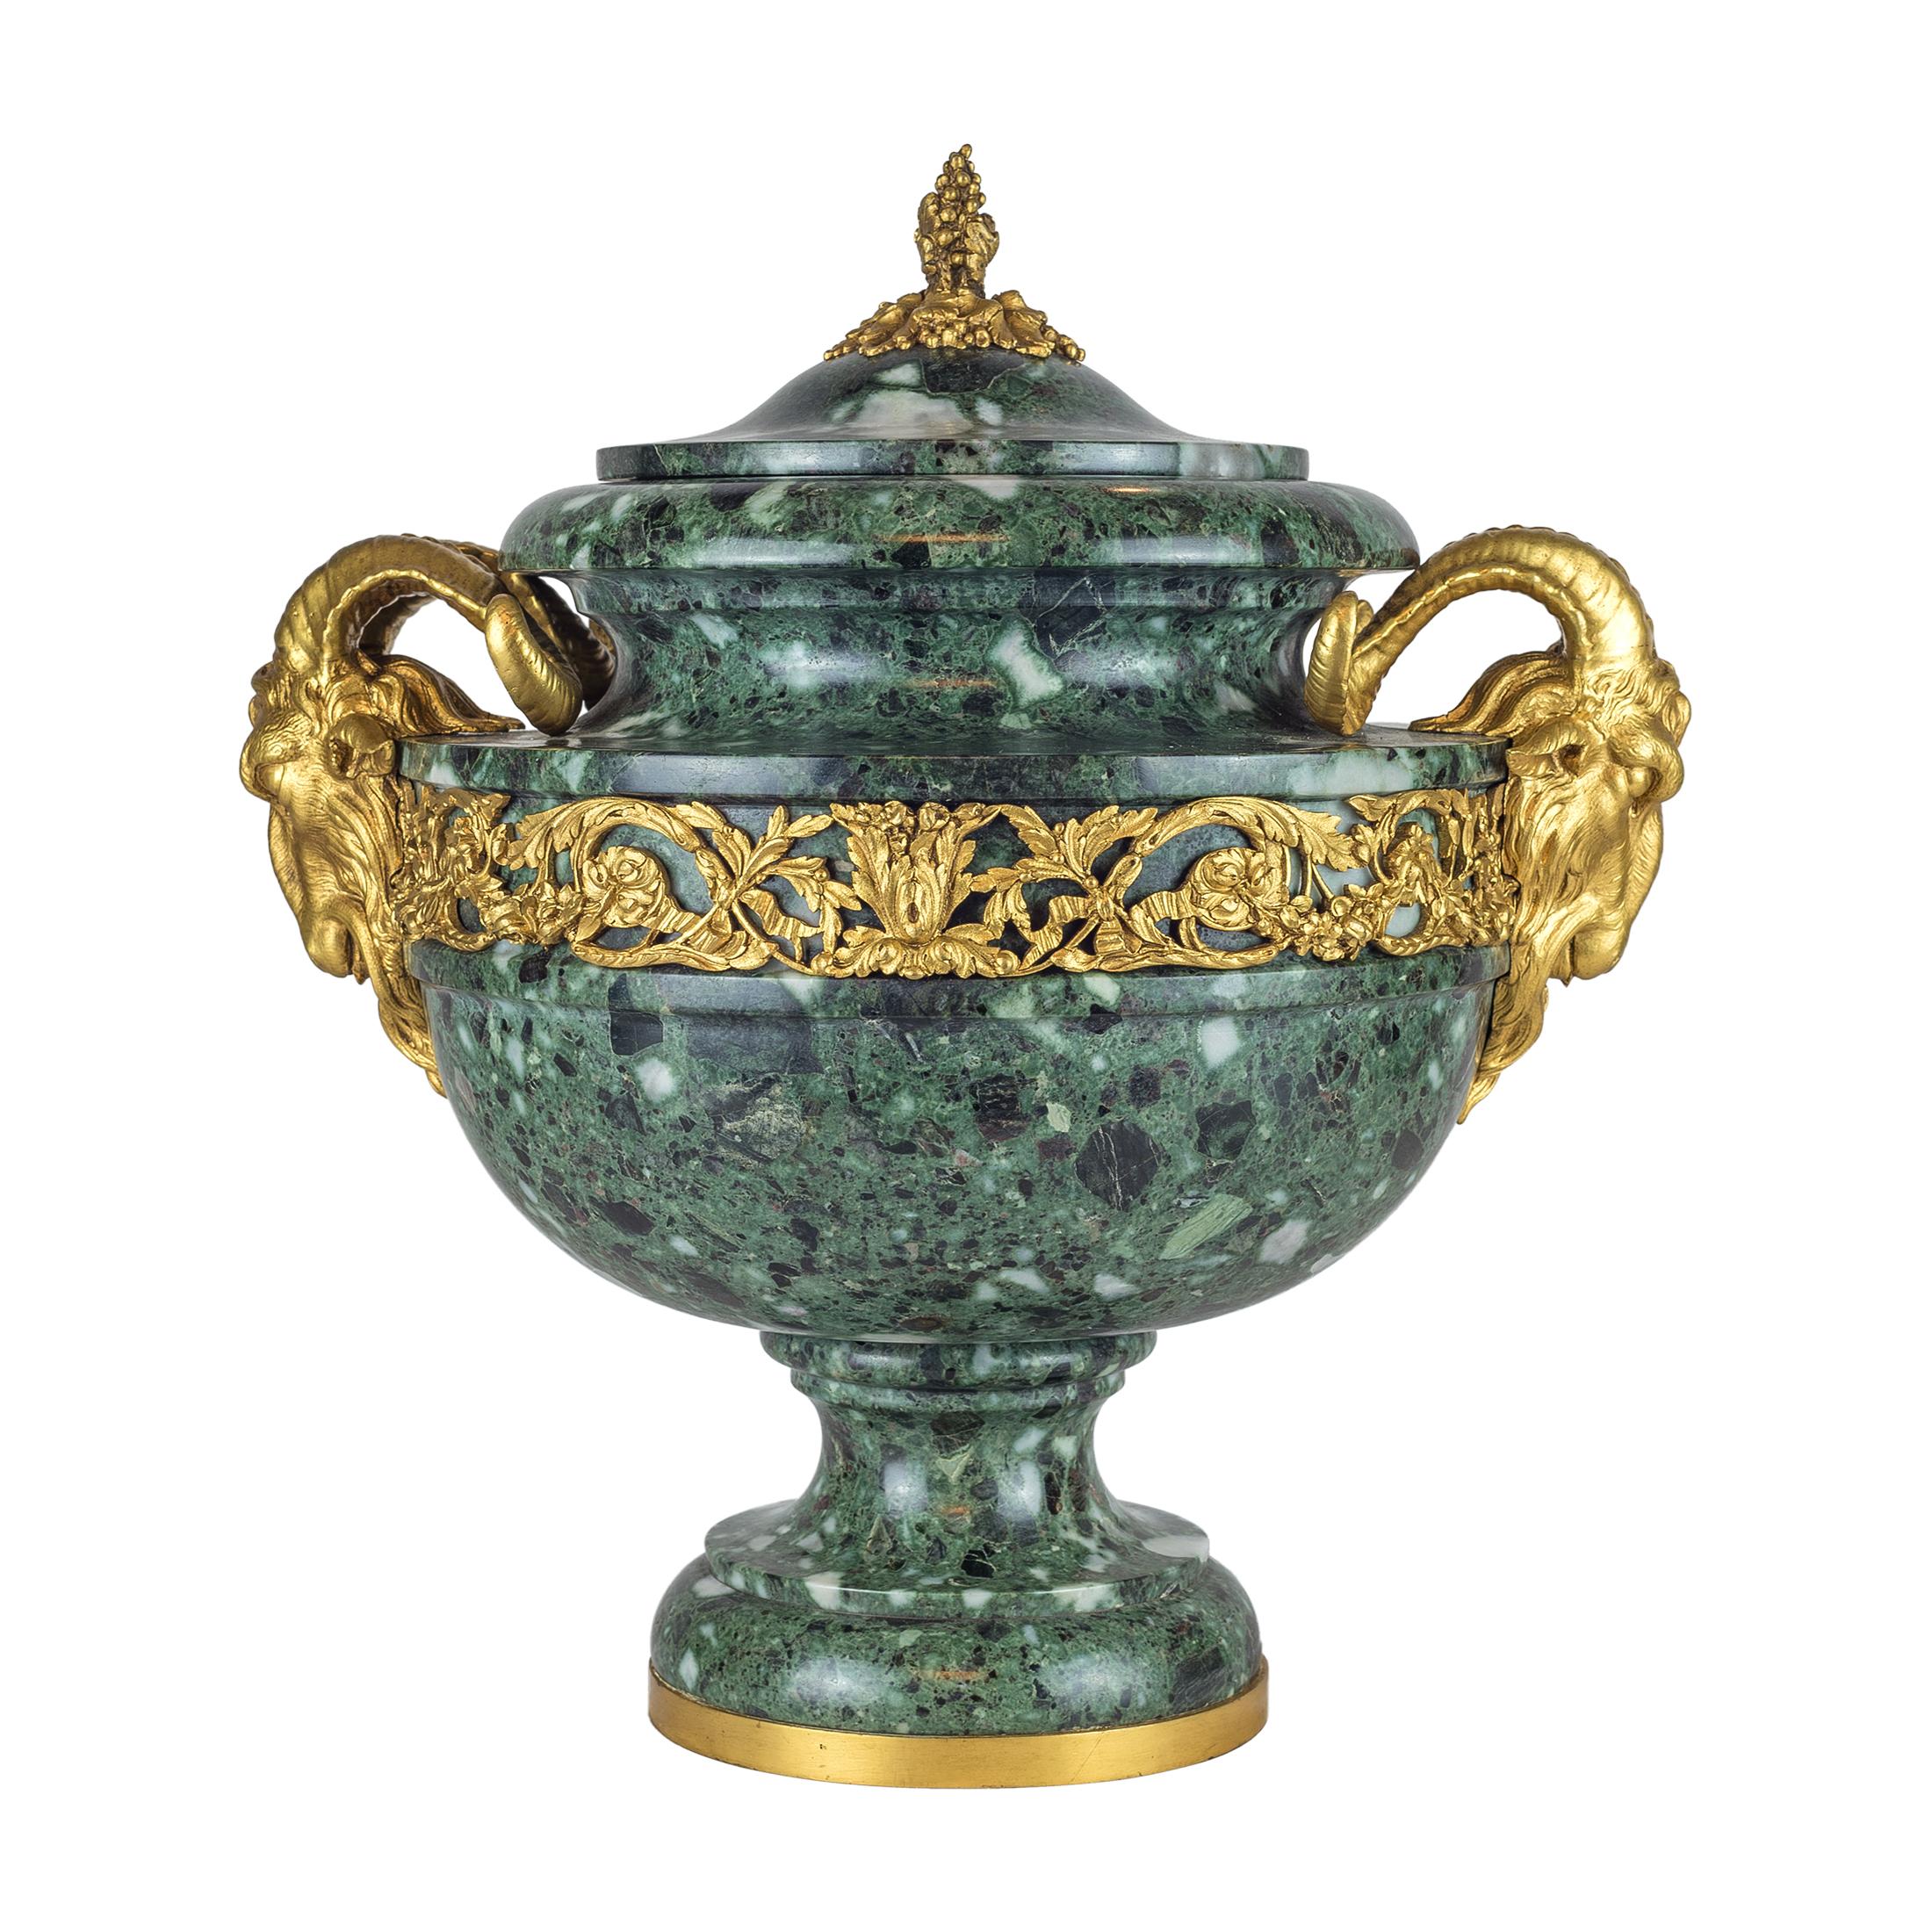 A Very Special Pair of Louis XVI Style Ormolu Mounted Verde Antico Marble Urns and Cover.
Each with grape finials. The handles formed ram’s head, raised upon a waisted sole and dome circular base. 

Origin: French?Date: 19th century?Dimension: 15